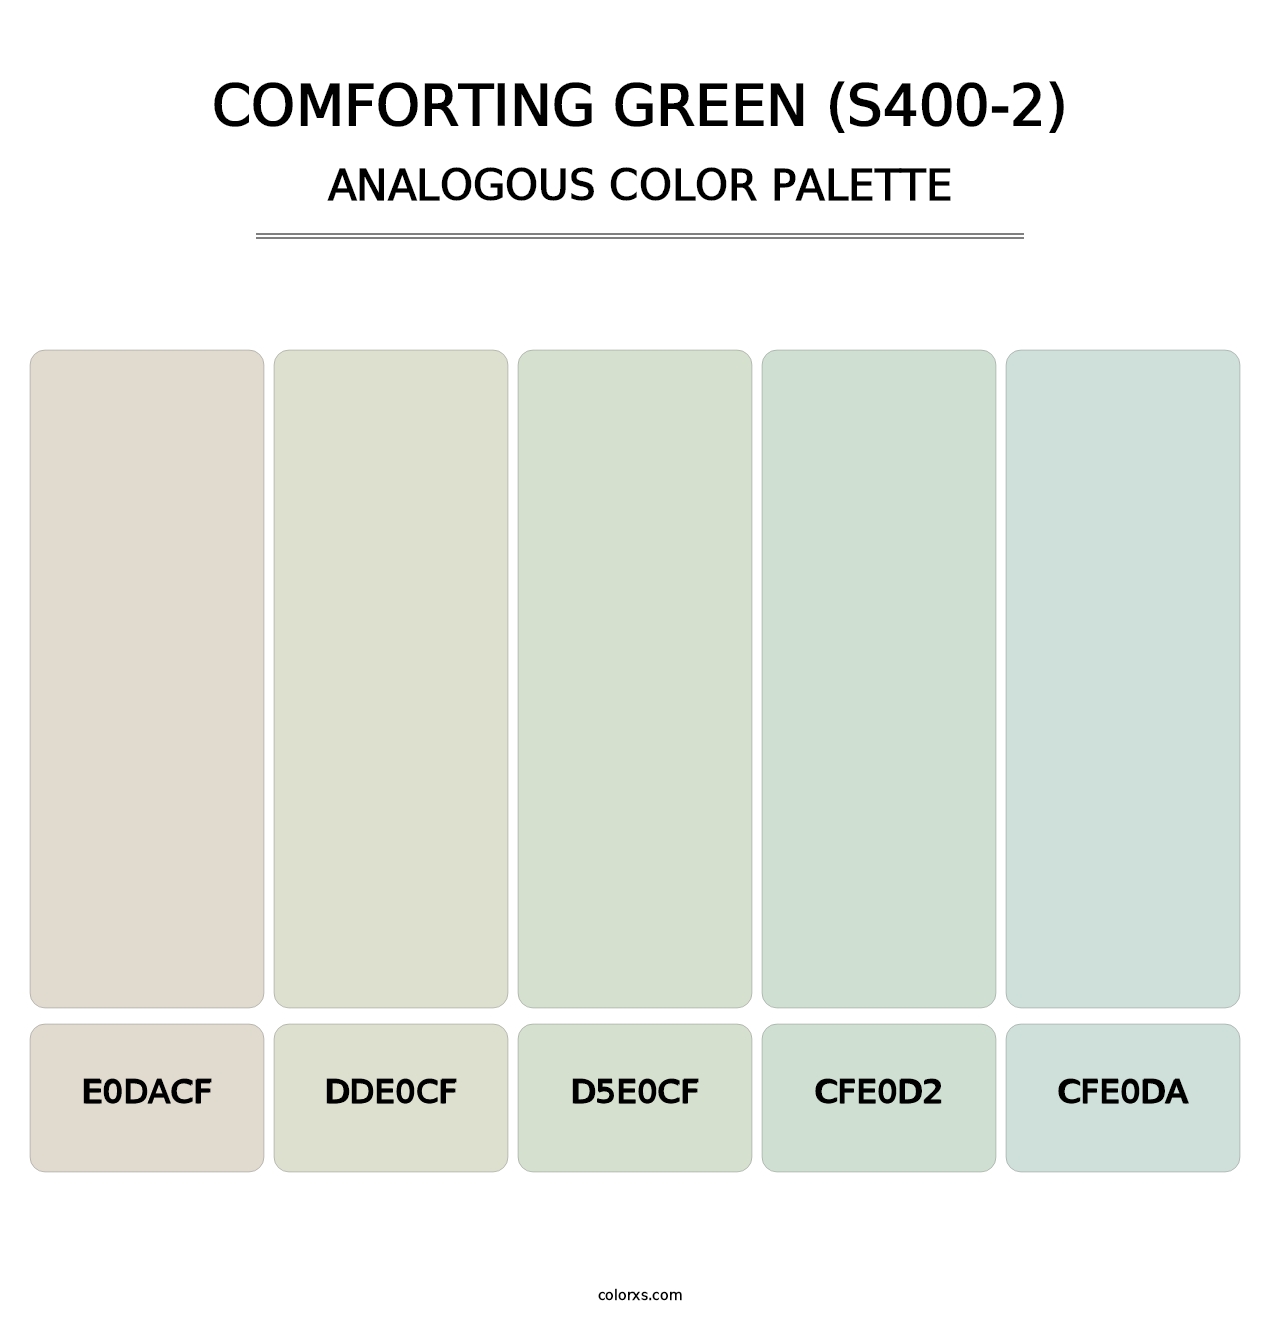 Comforting Green (S400-2) - Analogous Color Palette